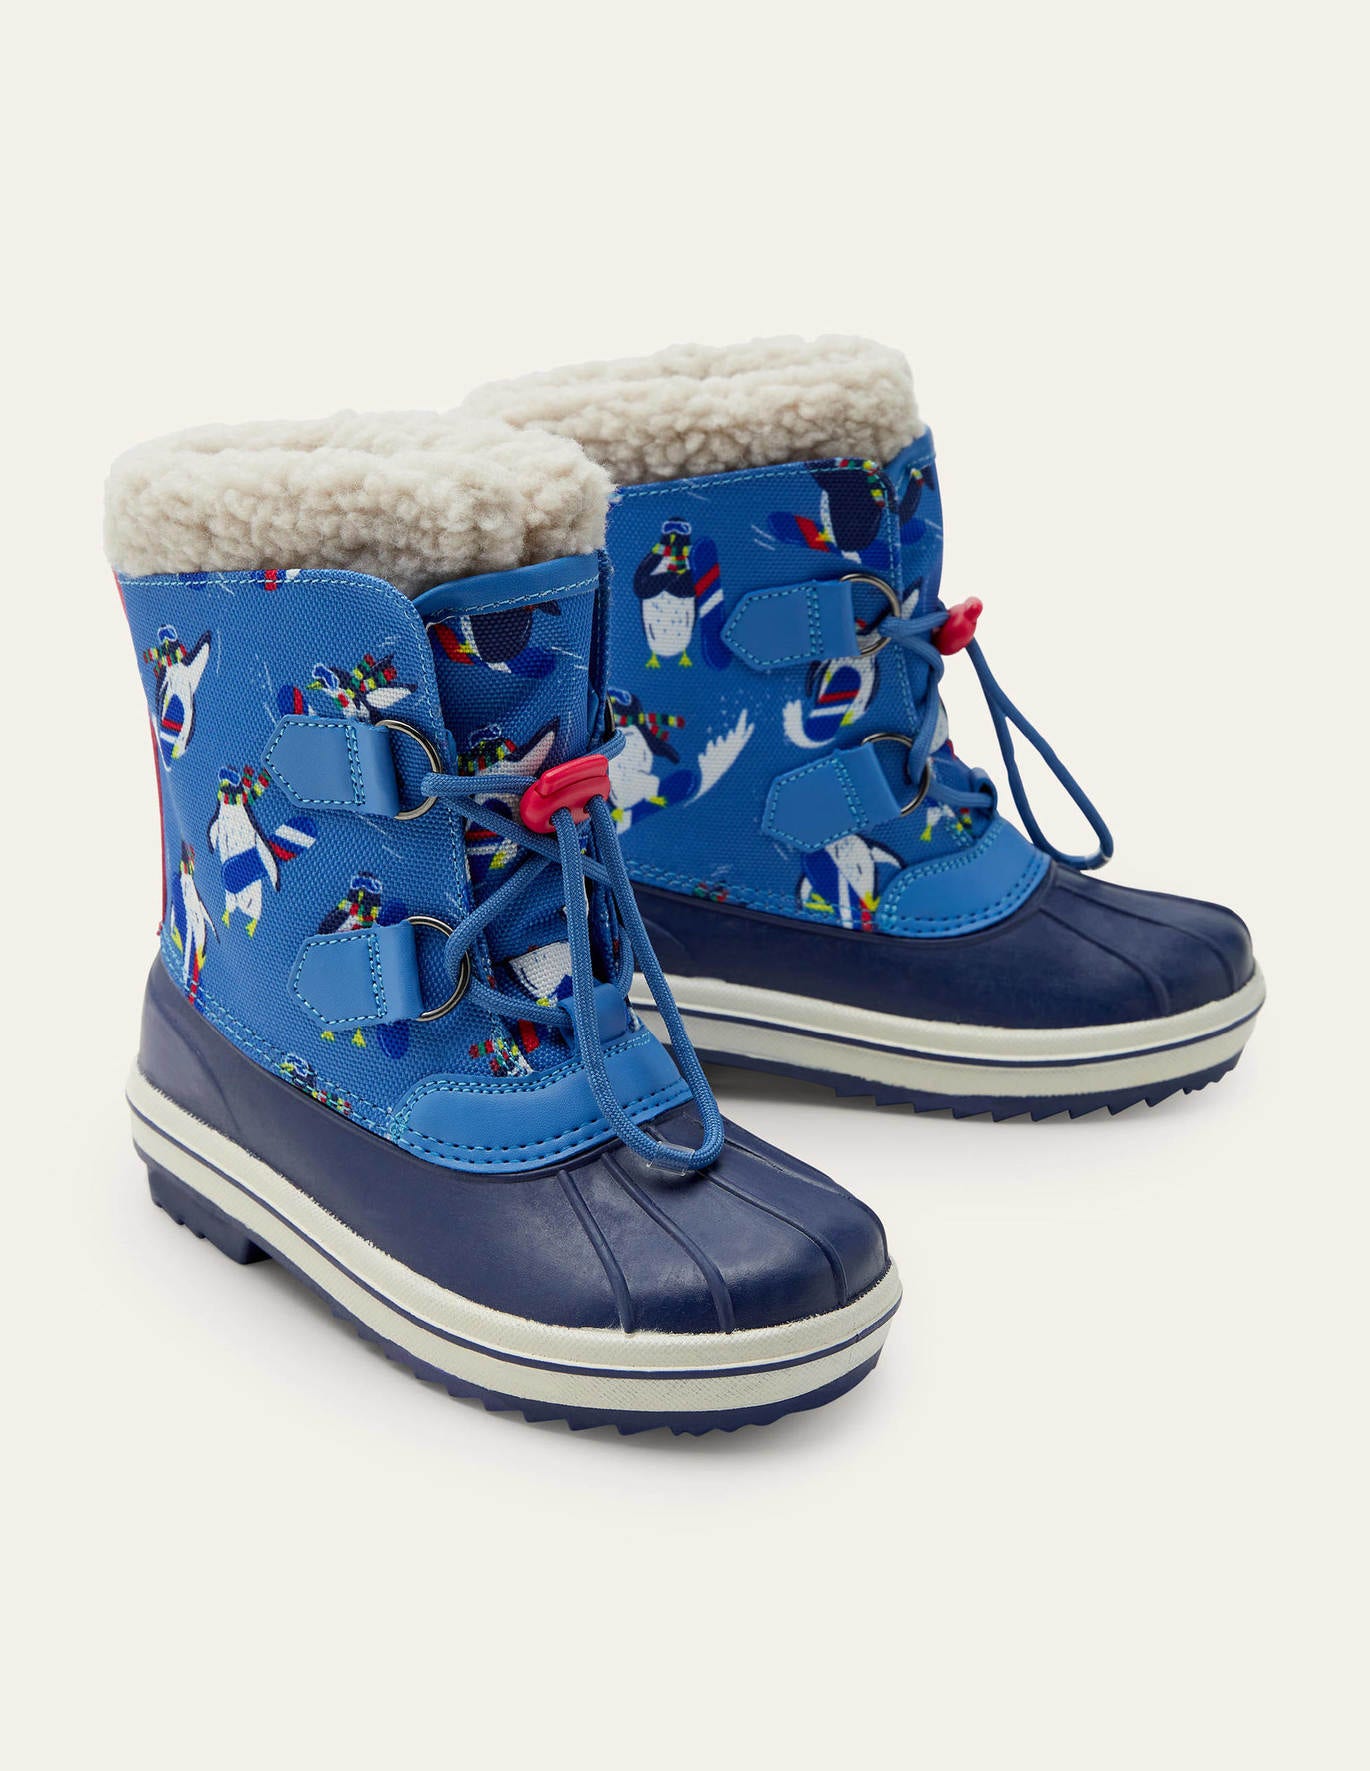 Boden All-weather Boots - College Navy Penguins